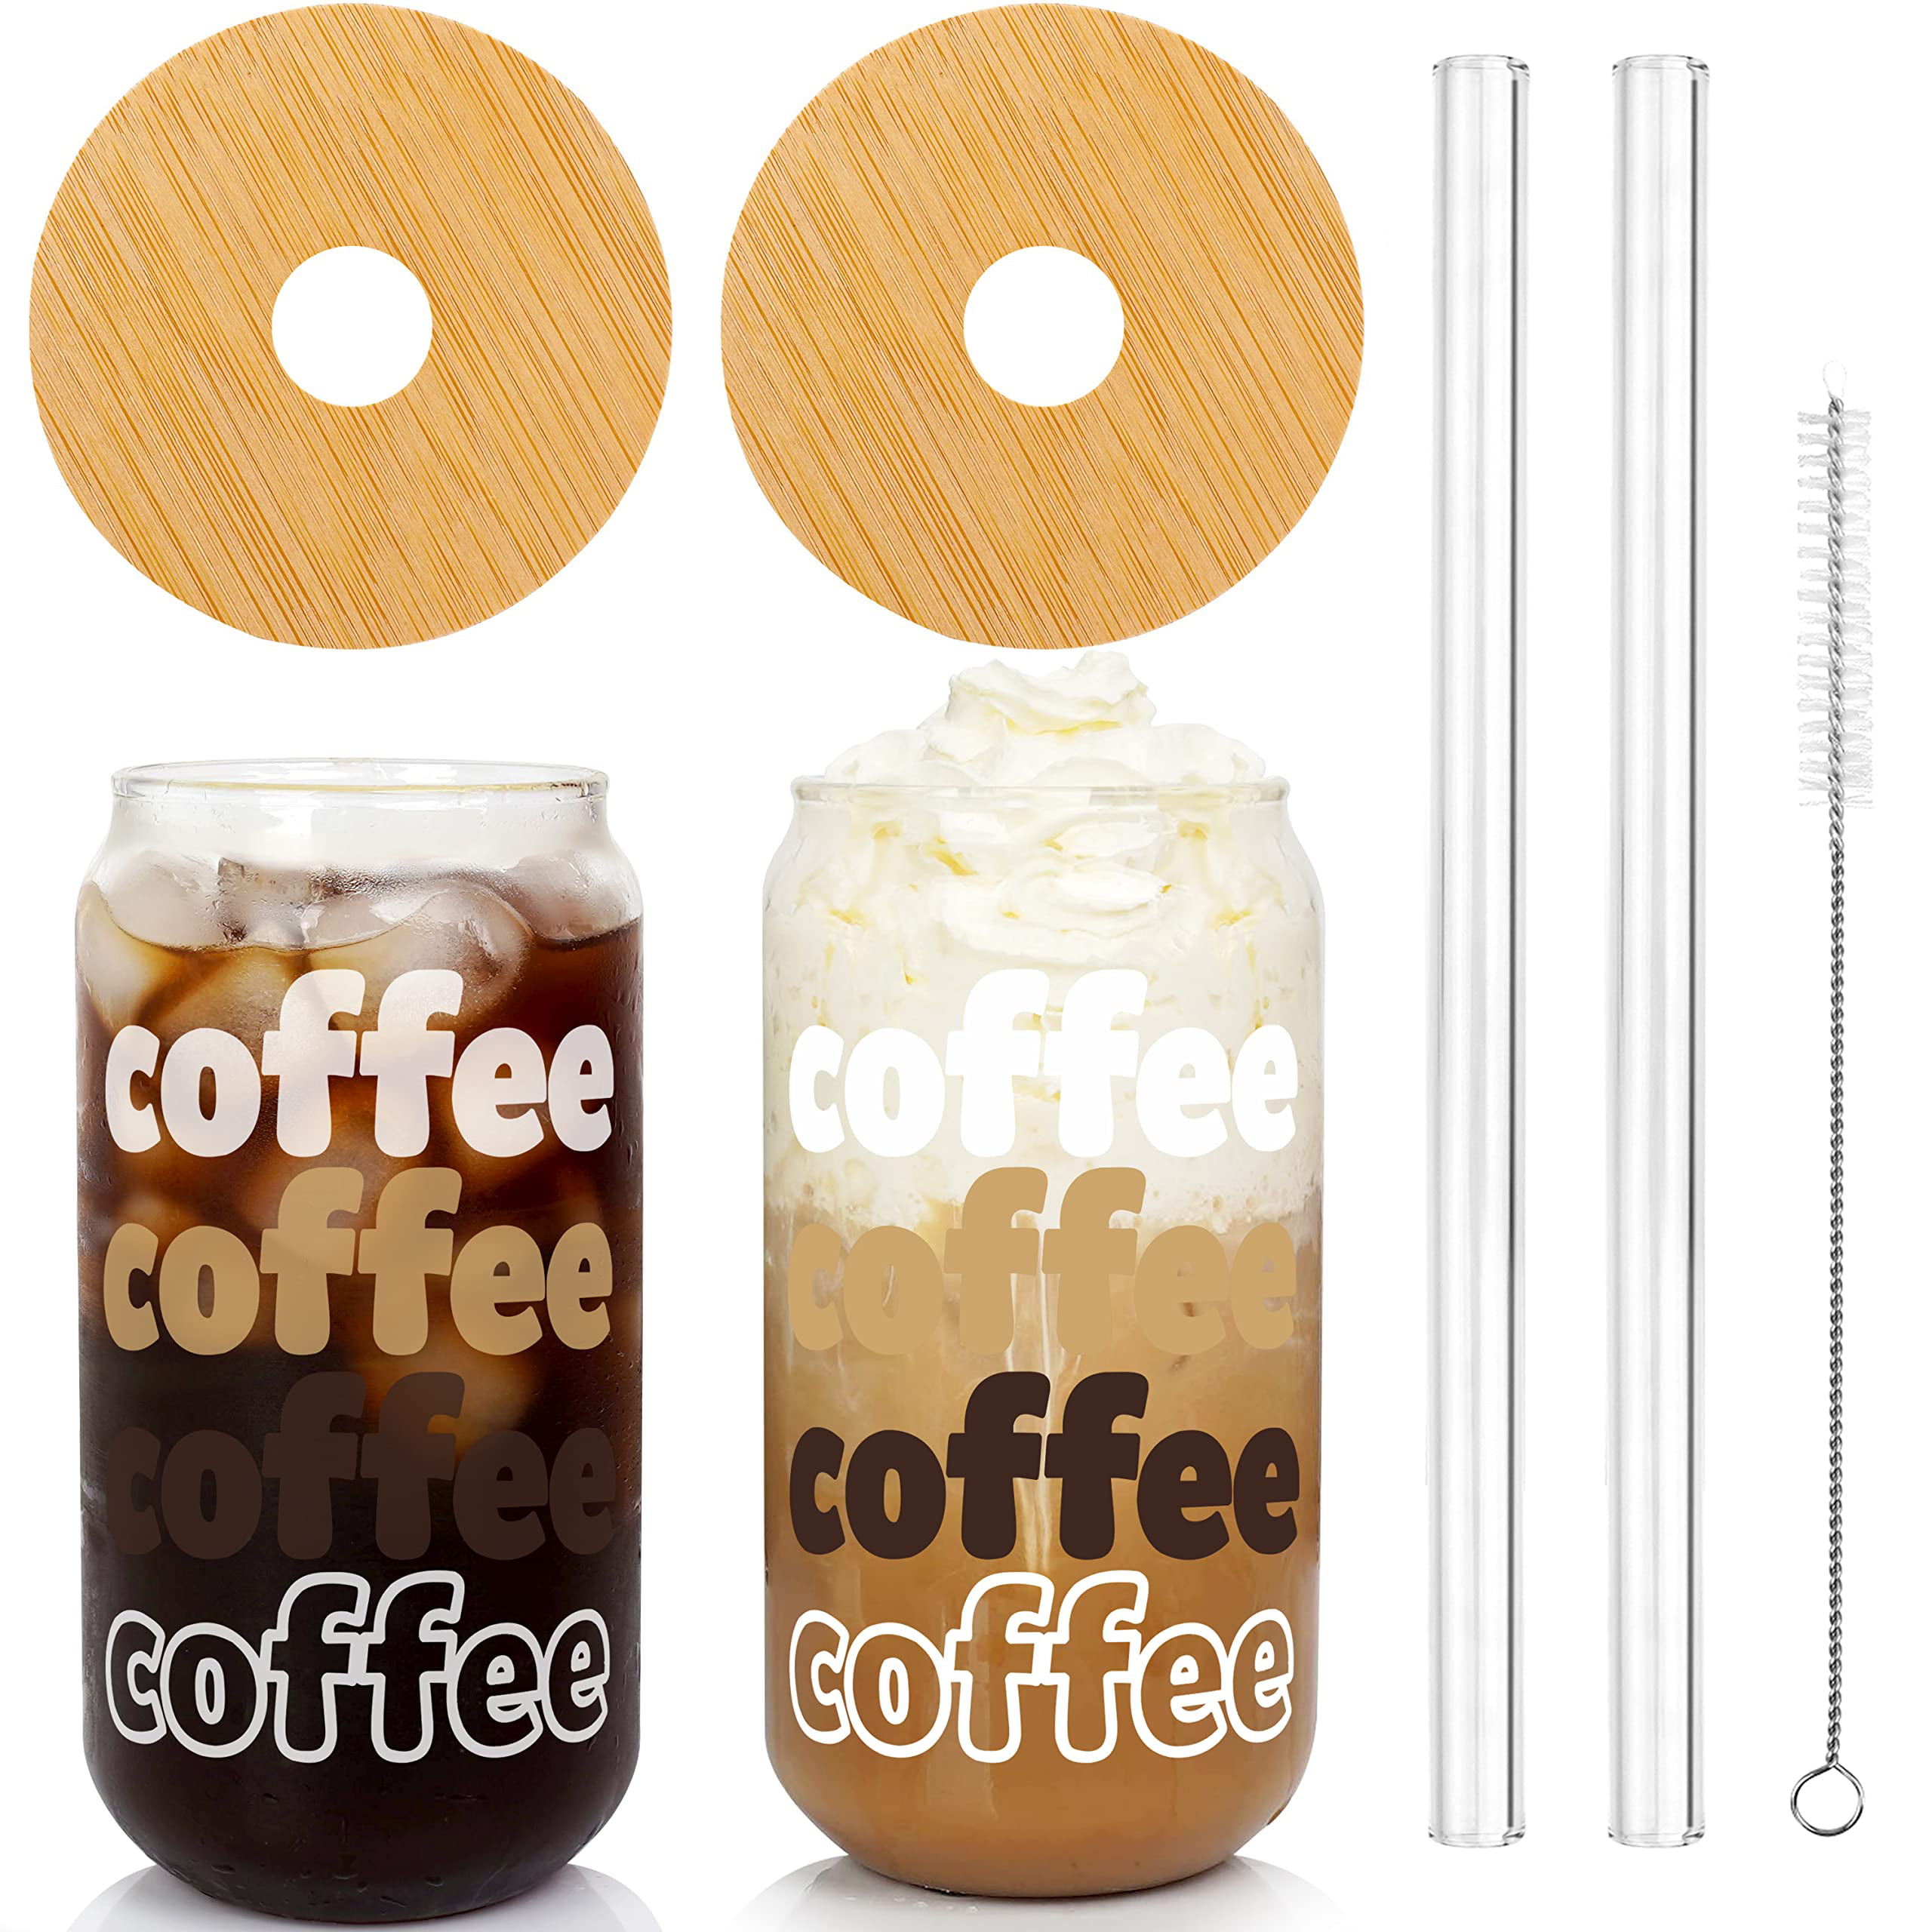  Benestanti 4 Pack Glass Cups with Bamboo Lids and Straws,  Reusable 22 oz Glass Tumbler with straw and lid For Boba, Smoothie, Iced  Coffee,Wide Mouth Drinking Jars for Bubble Tea,Juice,Gift 